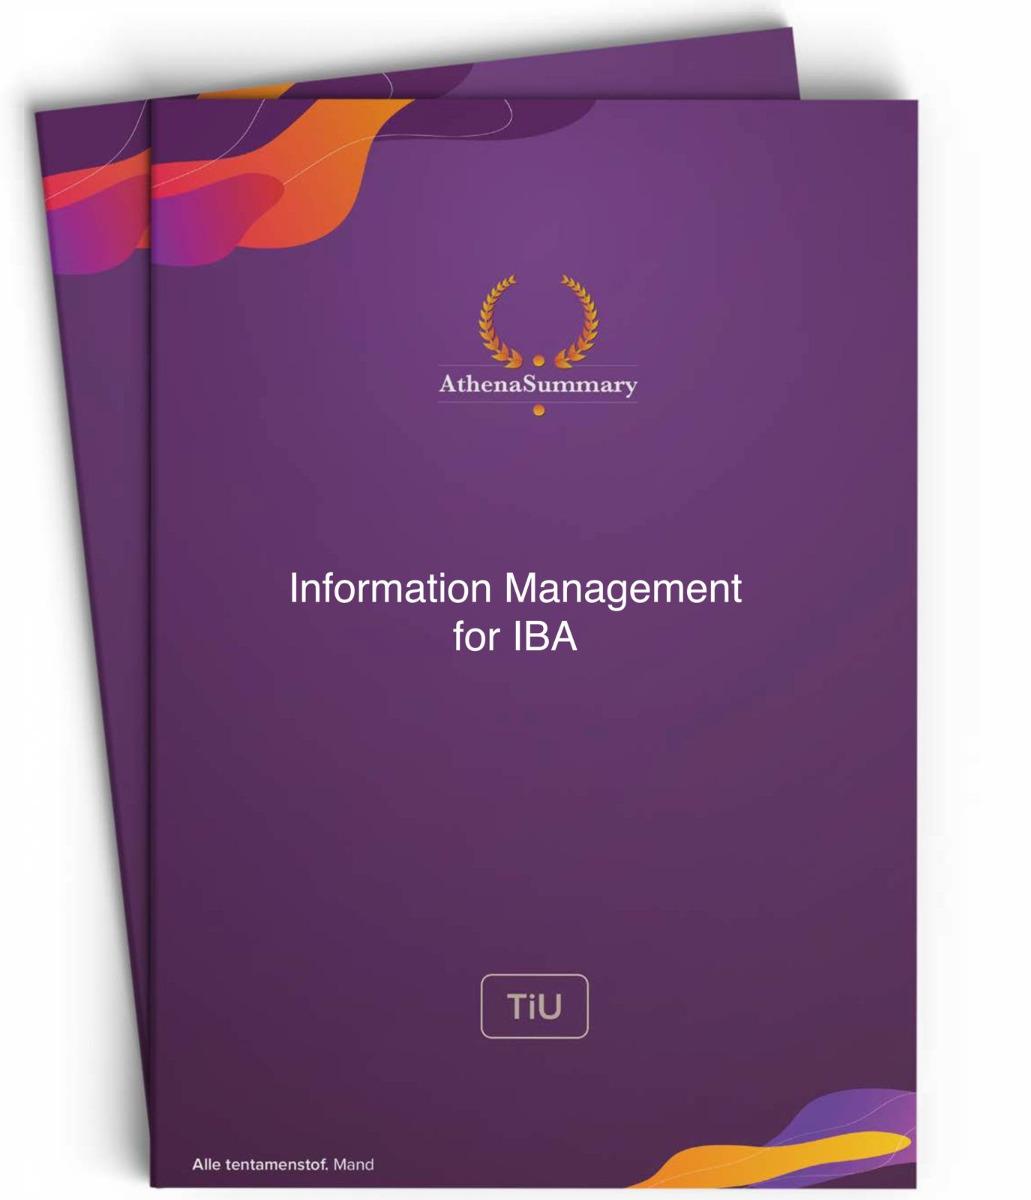 Literature and Lecture Summary: Information Management for IBA